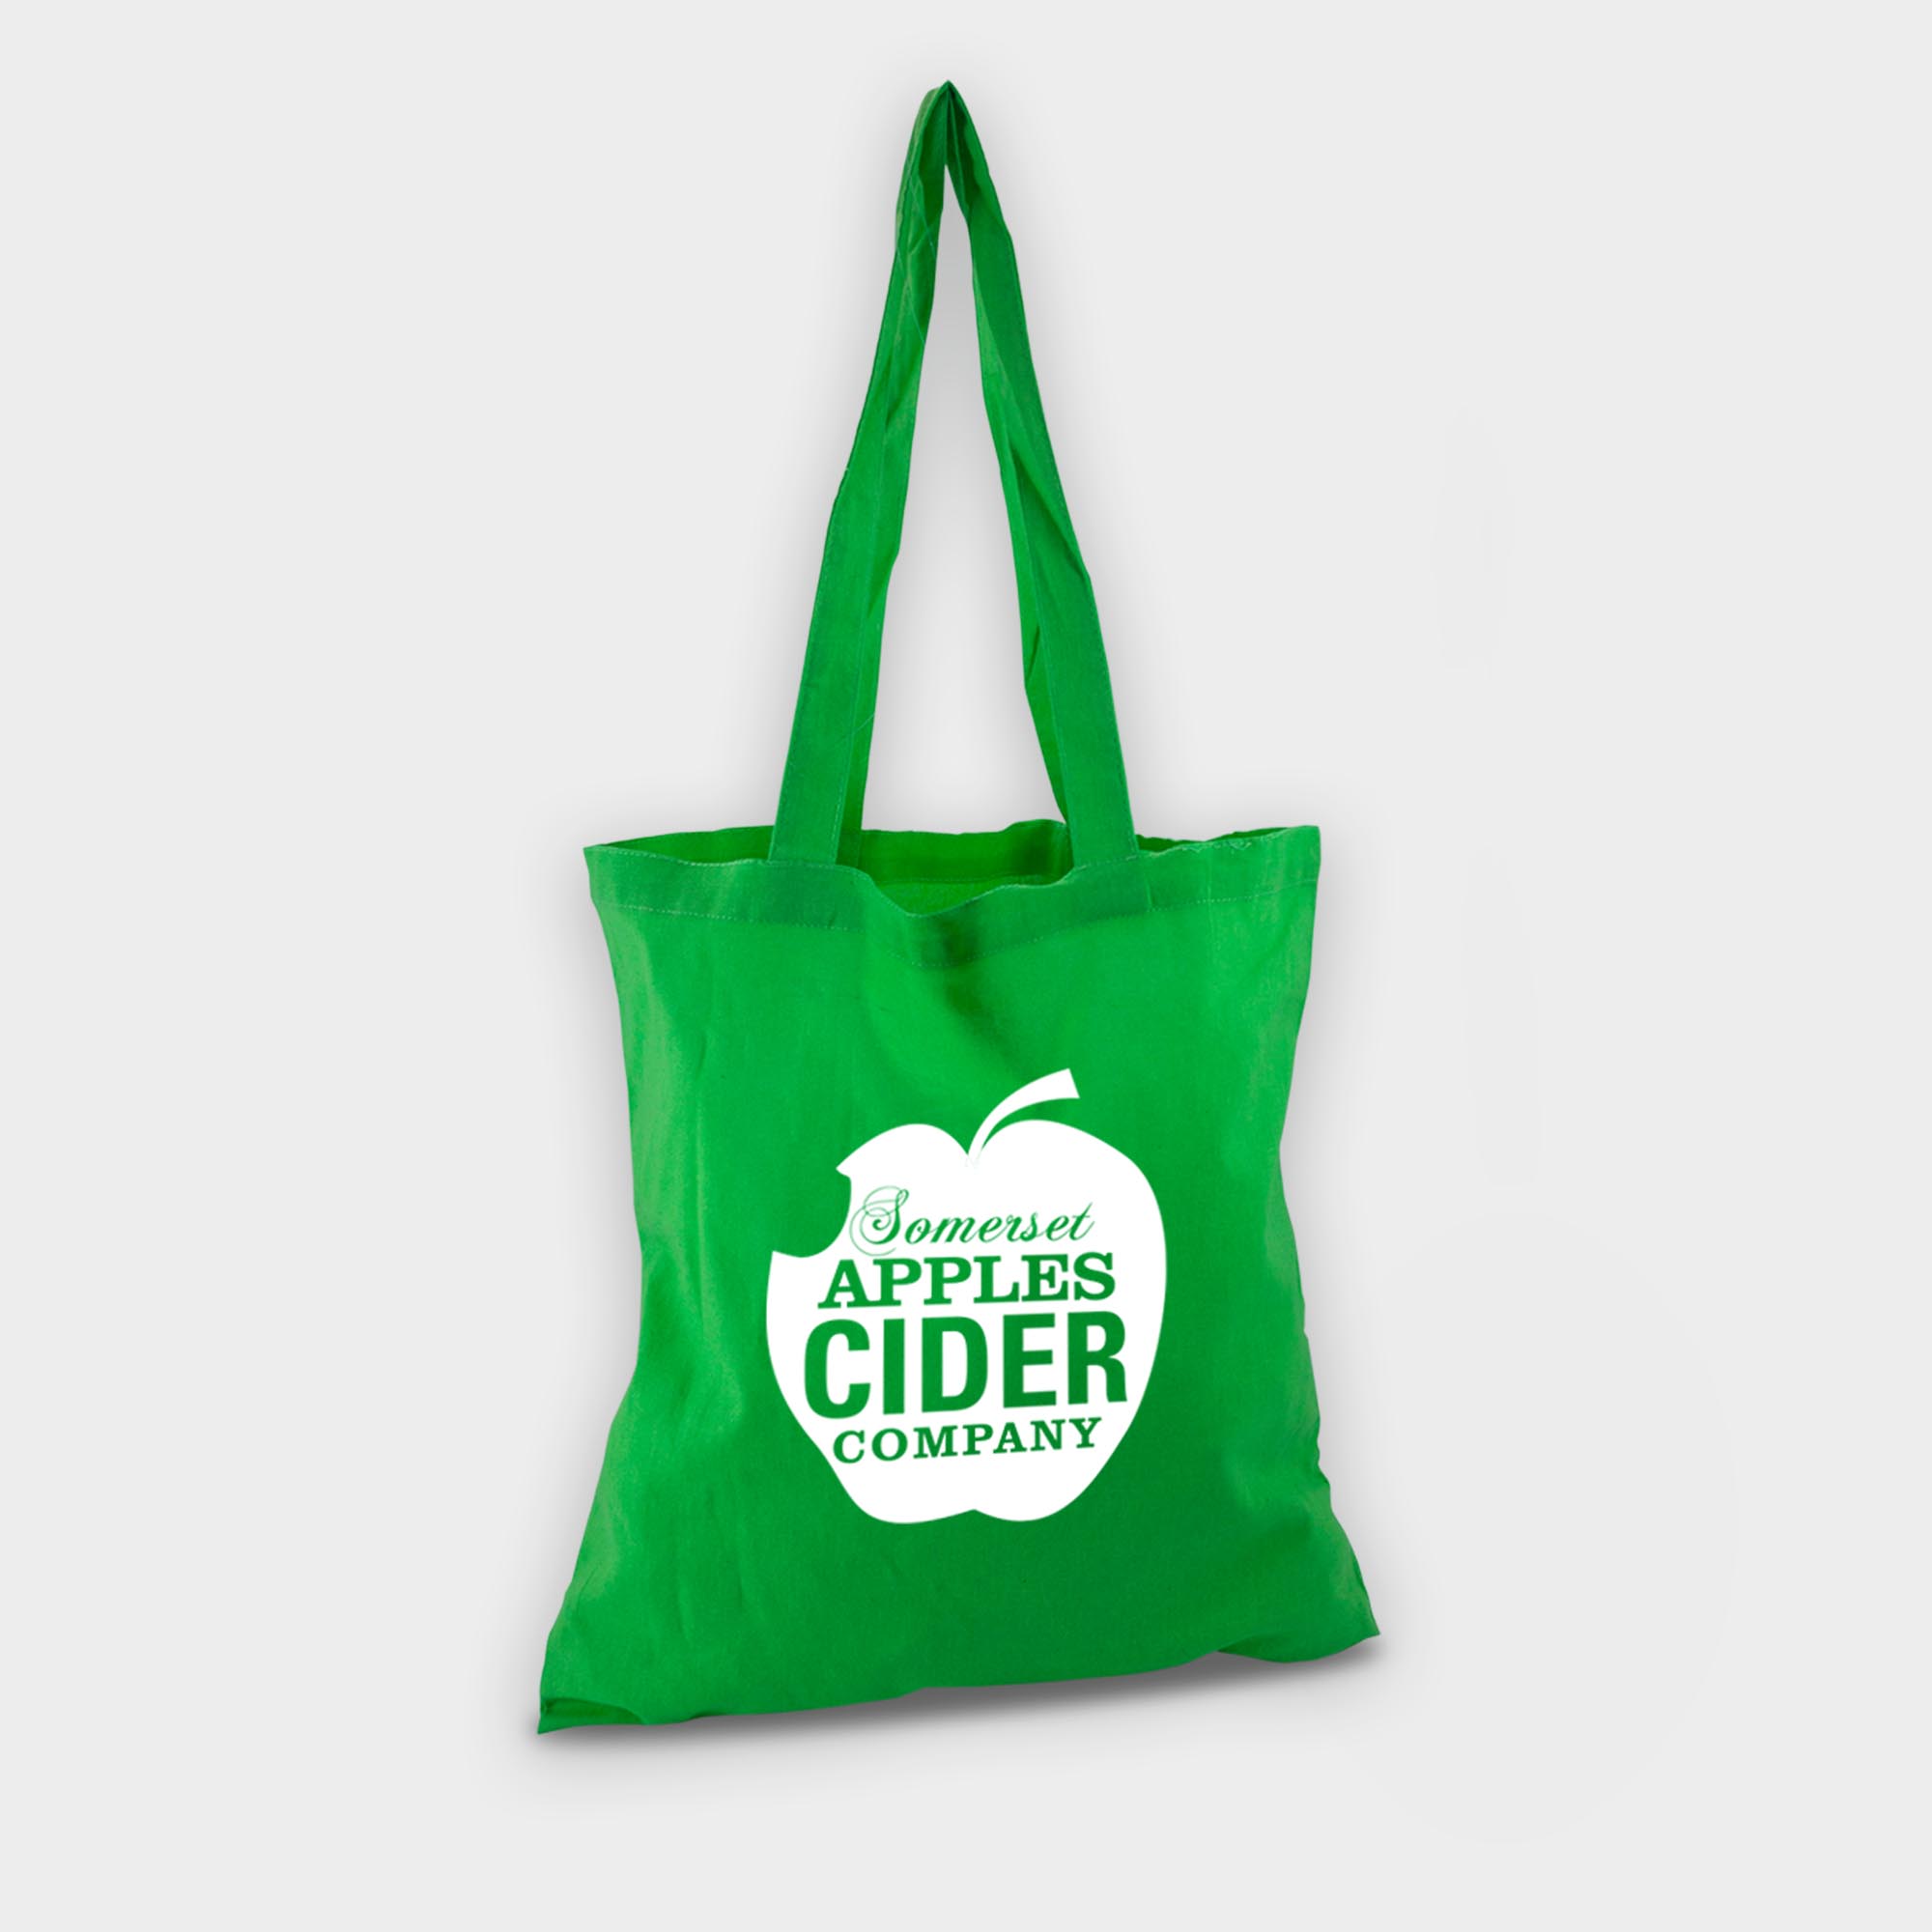 The Green & Good Brixton Shopper made from AZO-free dyed sustainable cotton. It is made from natural 120gsm cotton and has been dyed AZO-free dyes that are substantially better for you and for the environment. Available in a variety of popular colours. Oekotex 100 Standard. Green